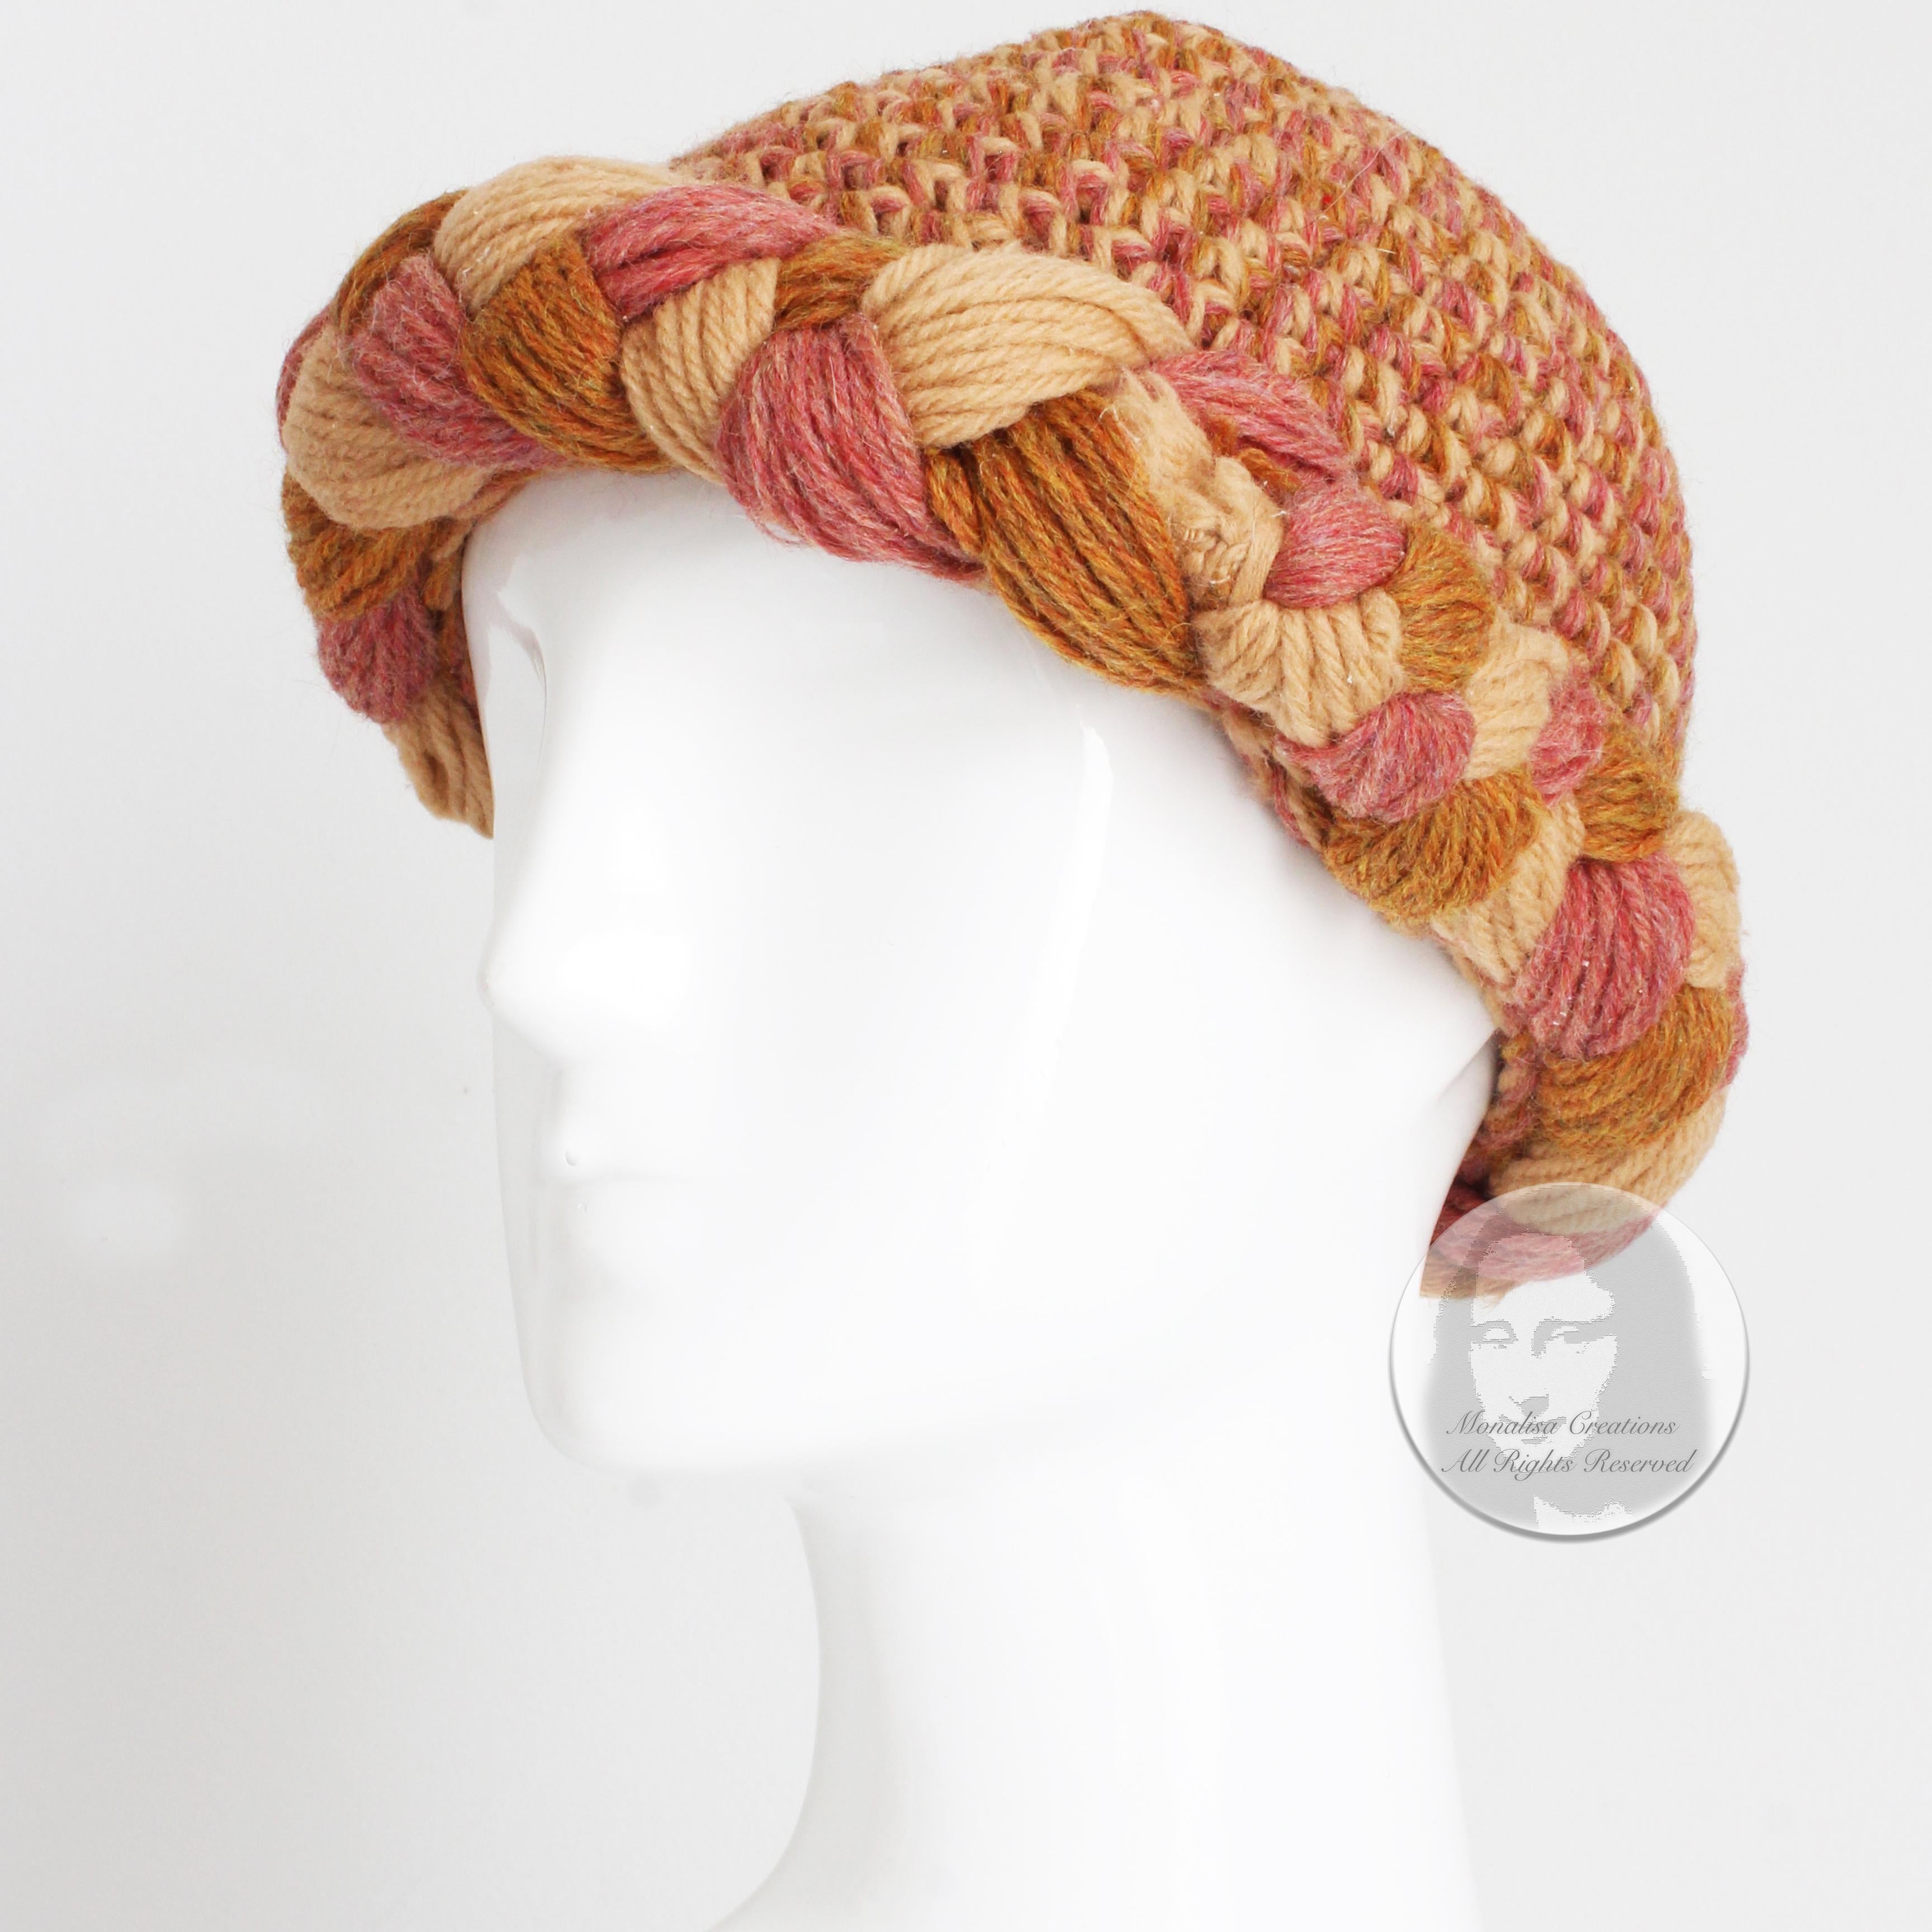 Fabulous vintage Yves Saint Laurent wool knit hat or cap with chunky braided border, likely made in the 1970s.

Made from multicolor wool yarn in shades of gold, pink, almond and melon, it features a thick braided border and is unlined inside. 